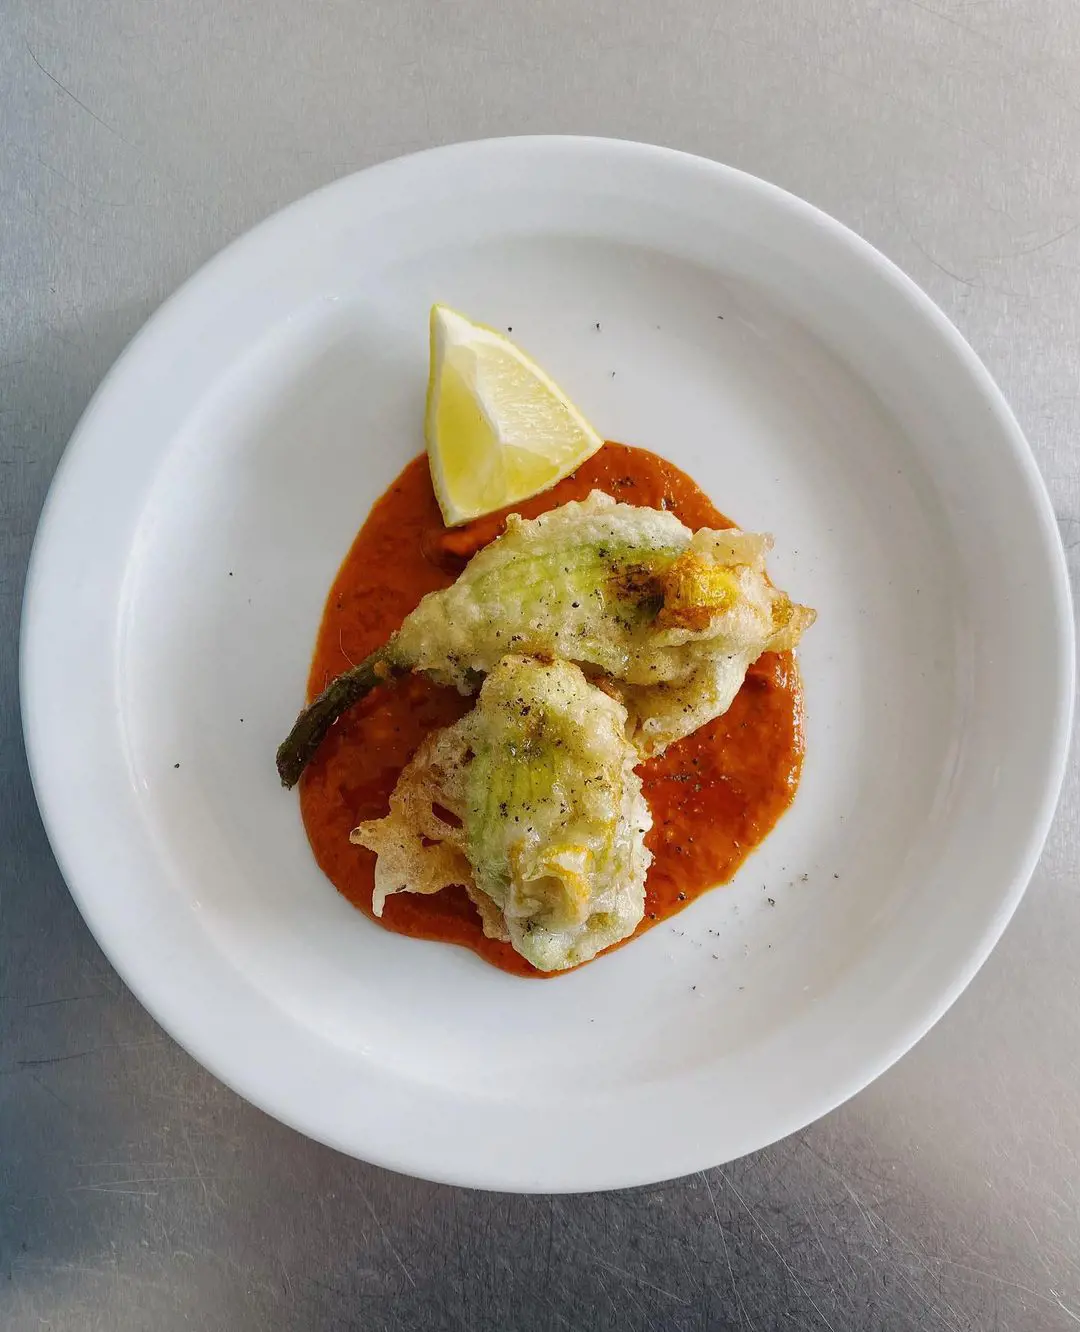 Battered courgette flowers stuffed with ricotta, served with salmorejo